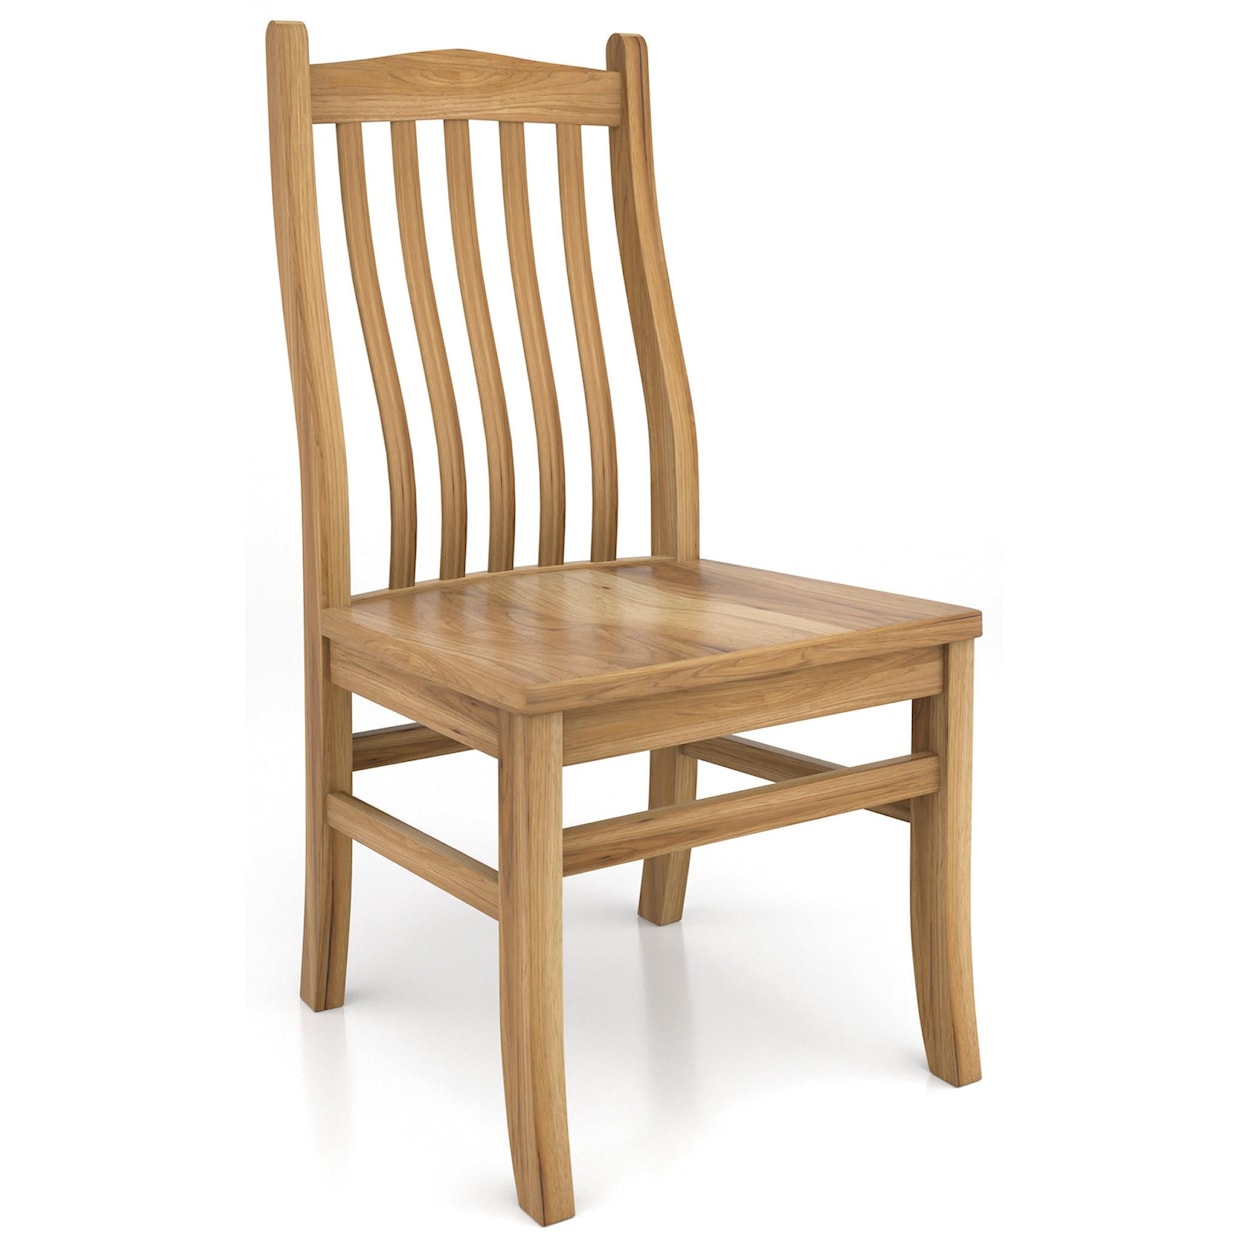 Wengerd Wood Products Lincoln Side Chair